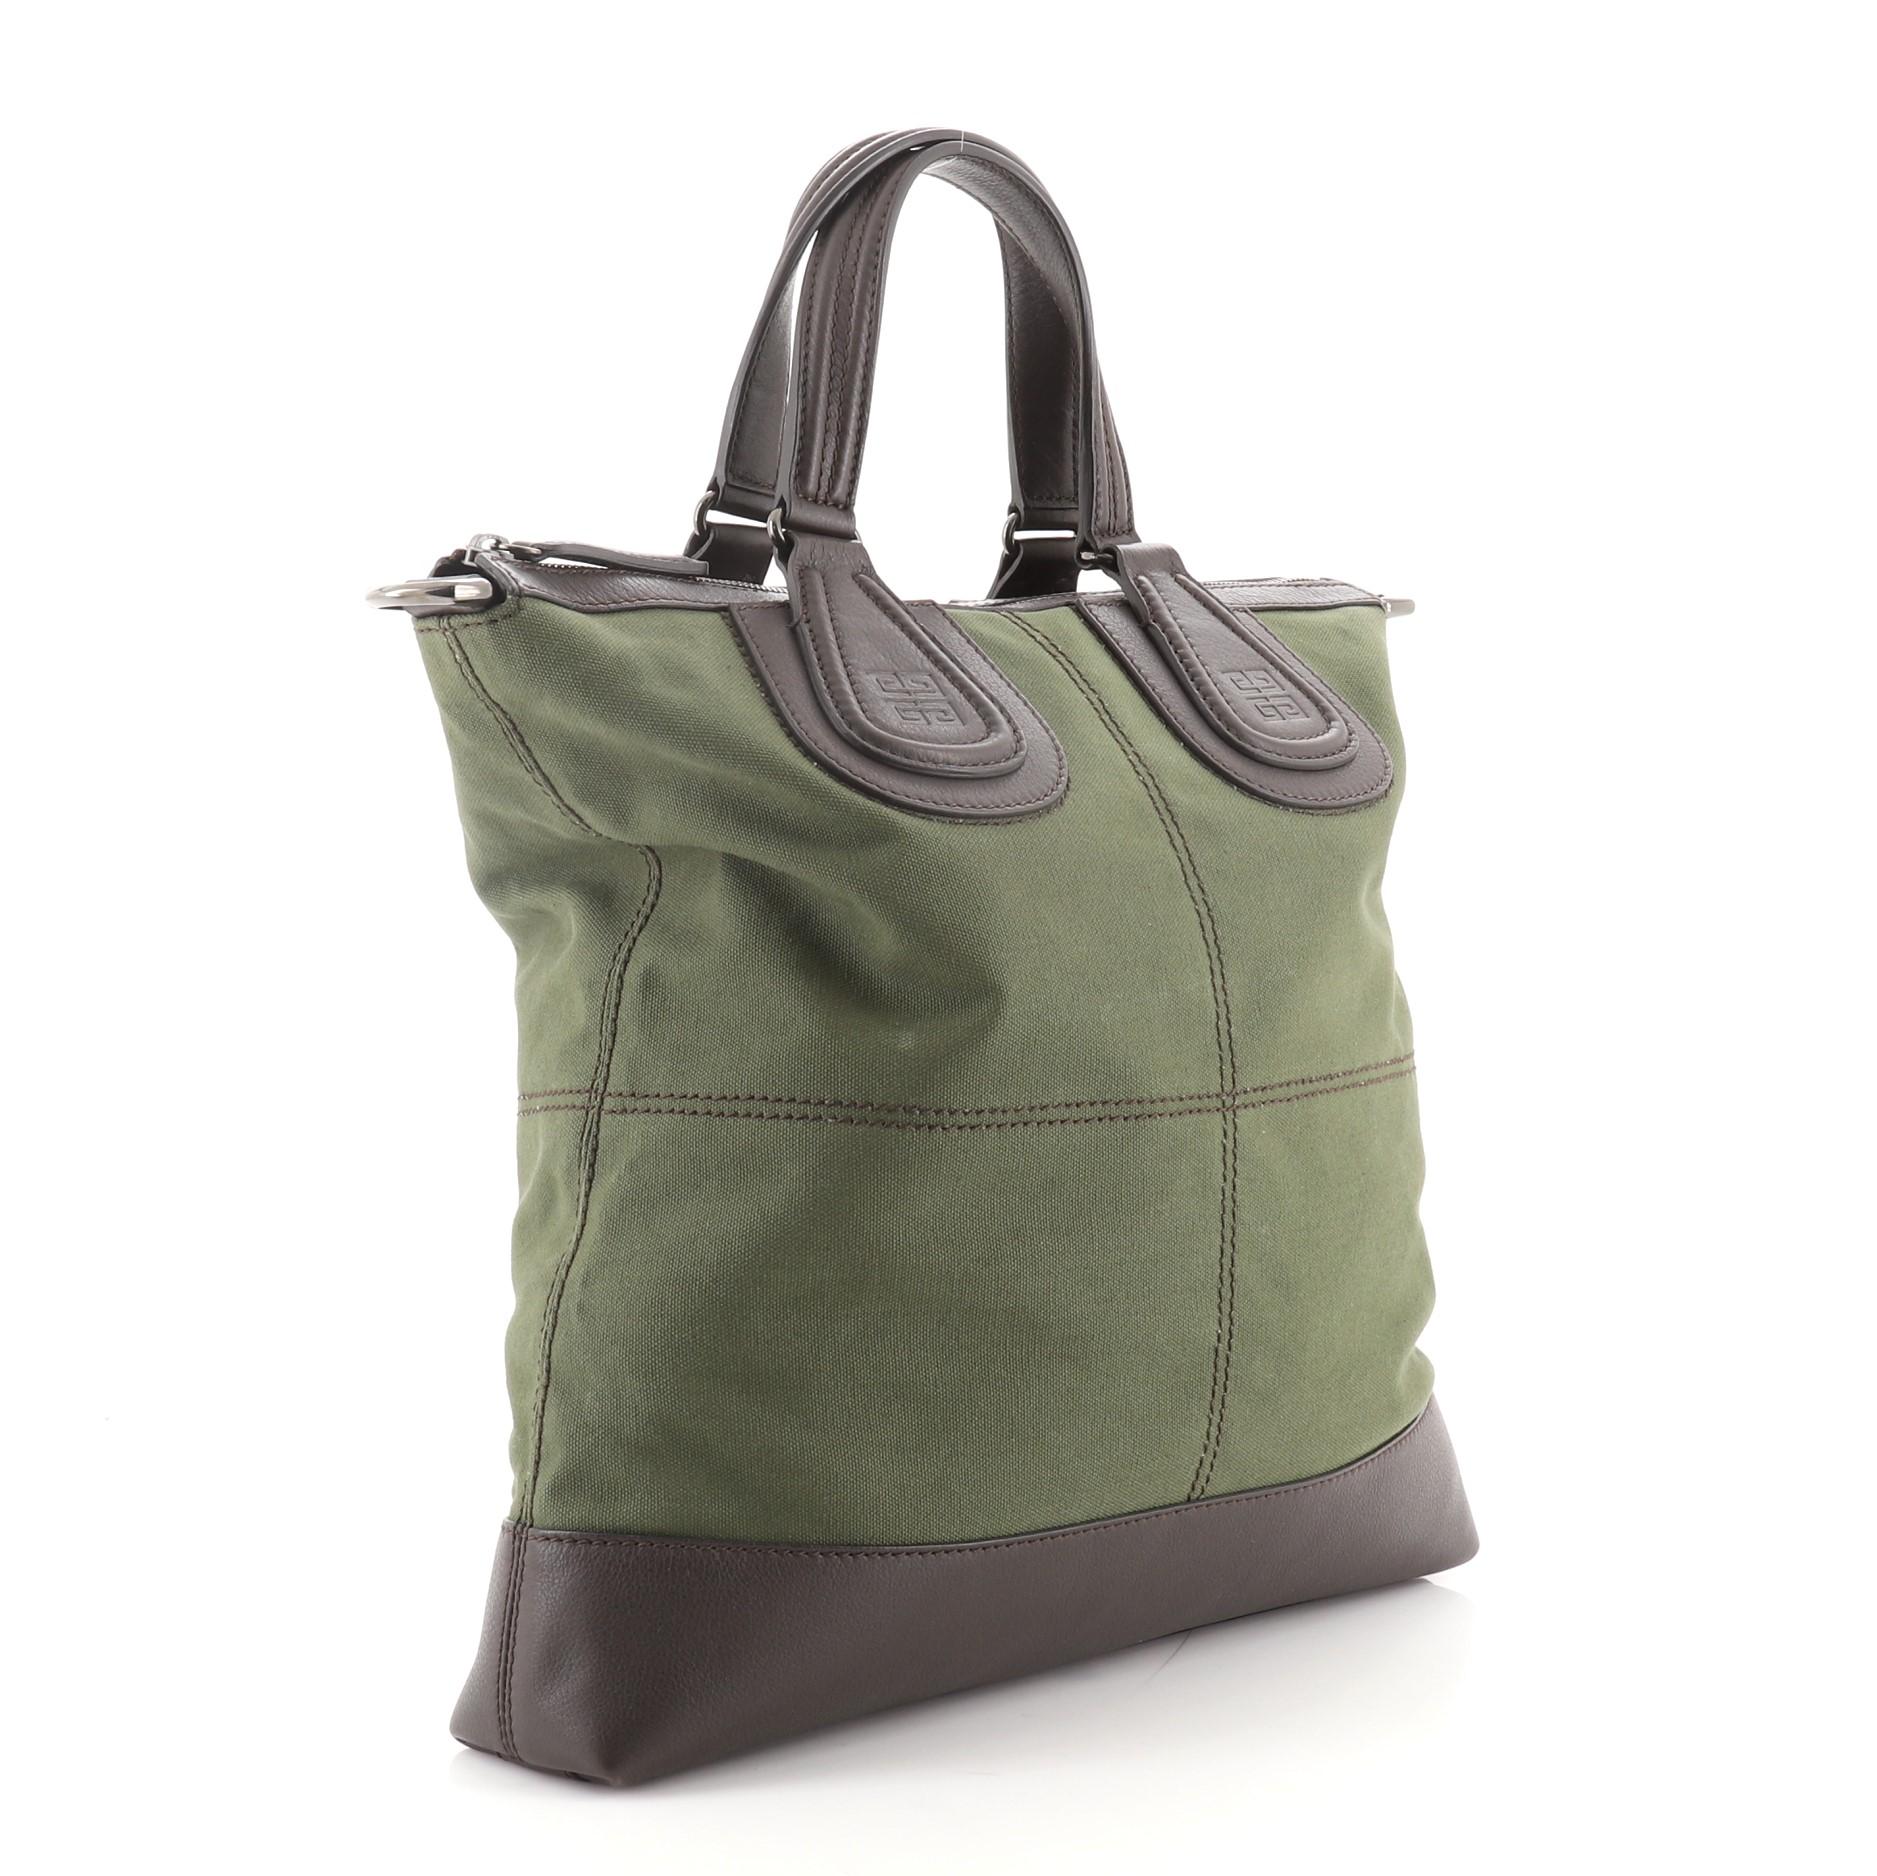 Givenchy Nightingale Flat Shopper Tote Canvas with Leather
Brown, Green

Condition Details: Minor scuffs and wear on leather trims and handles, light marks on exterior, wear on base corners, scratches on hardware.

52949MSC

Height 15